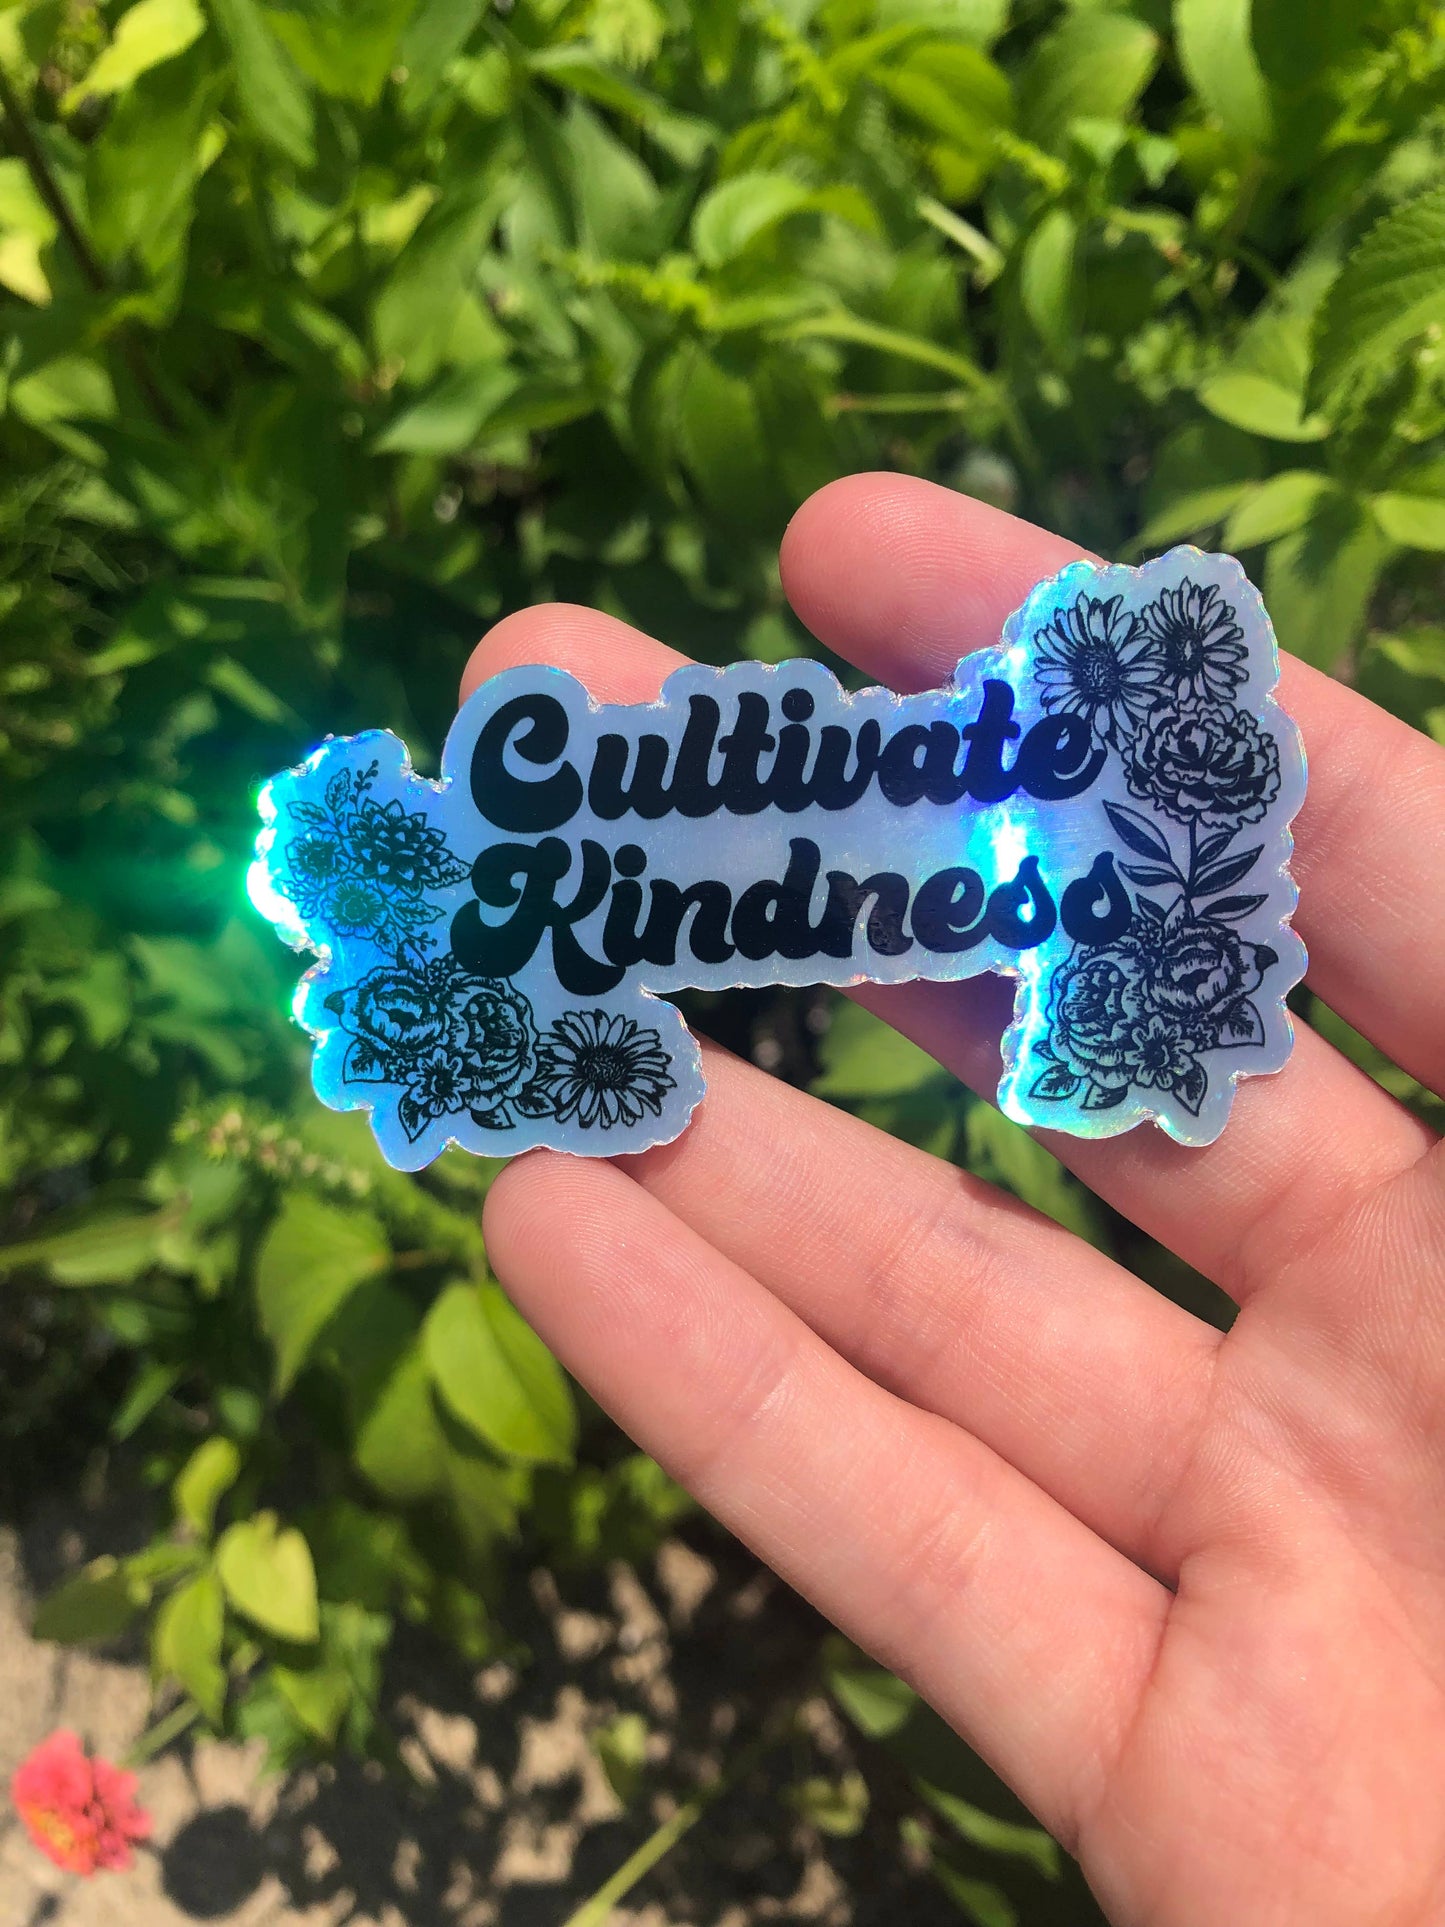 Cultivate Kindness Holographic Sticker